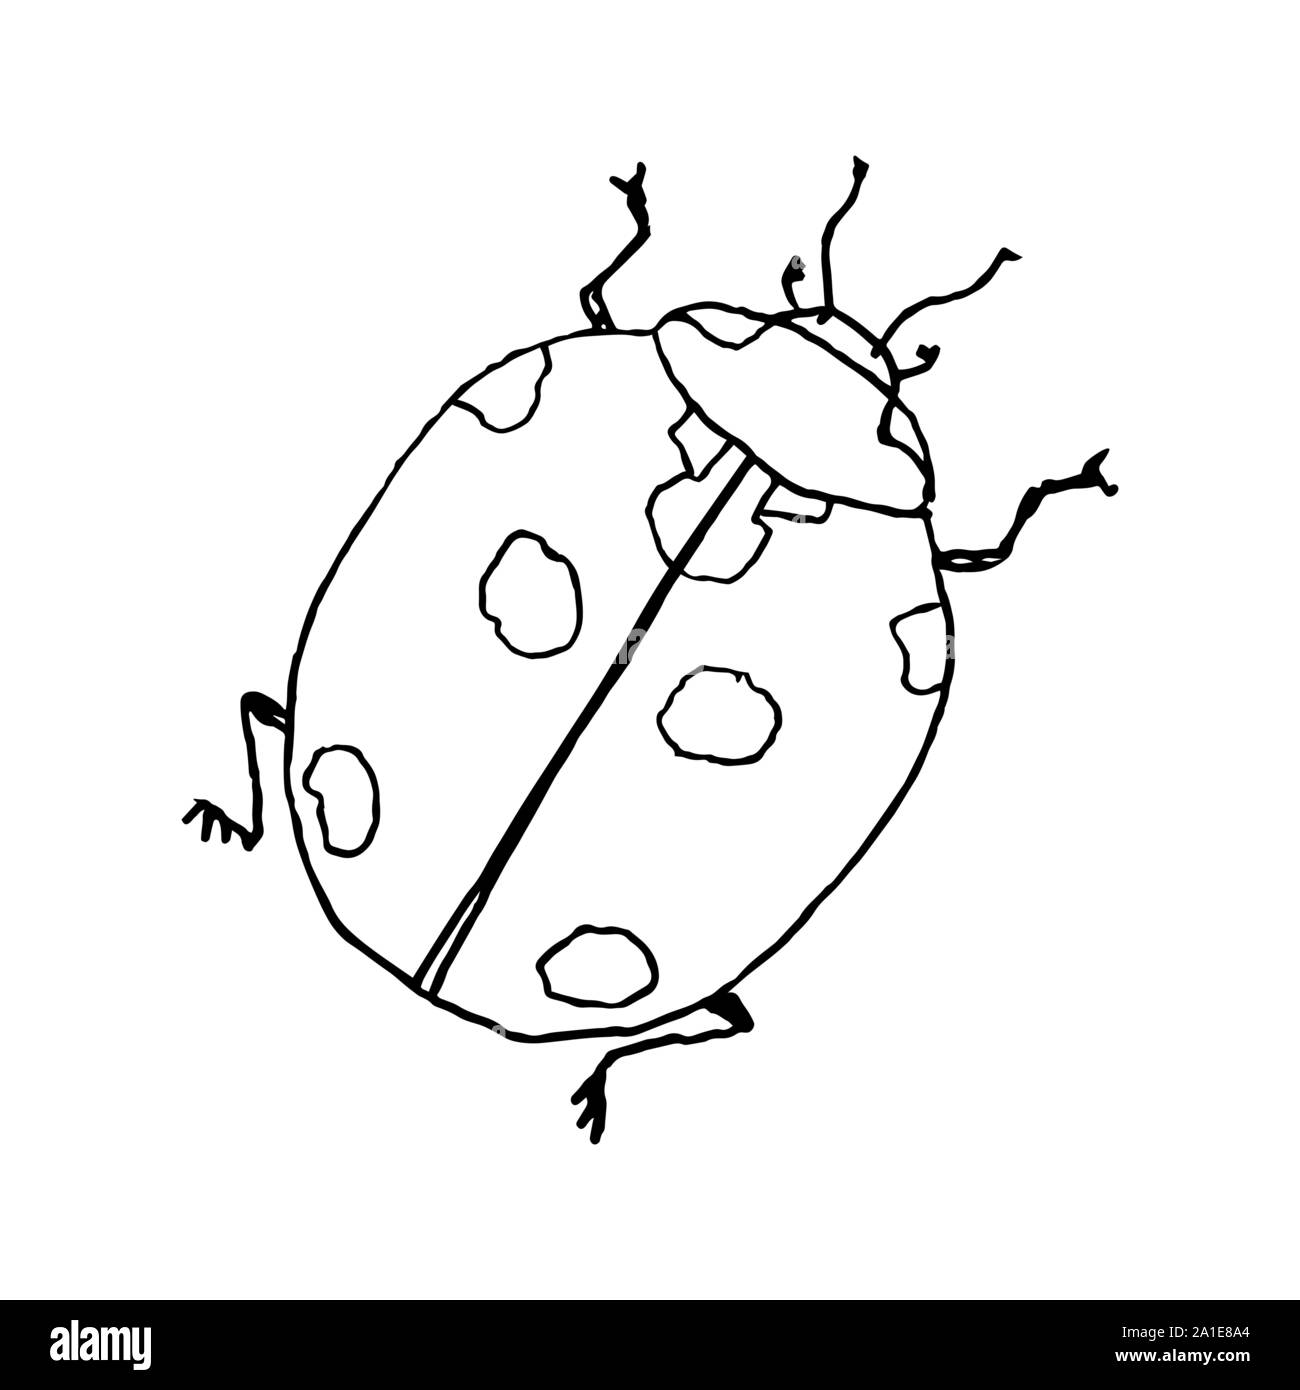 BUG DRAWING  EASY DRAWING OF BUG FOR KIDS  VERY EASY DRAWING FOR KID  BUG  SKETCH  INSECT DRAWING  YouTube